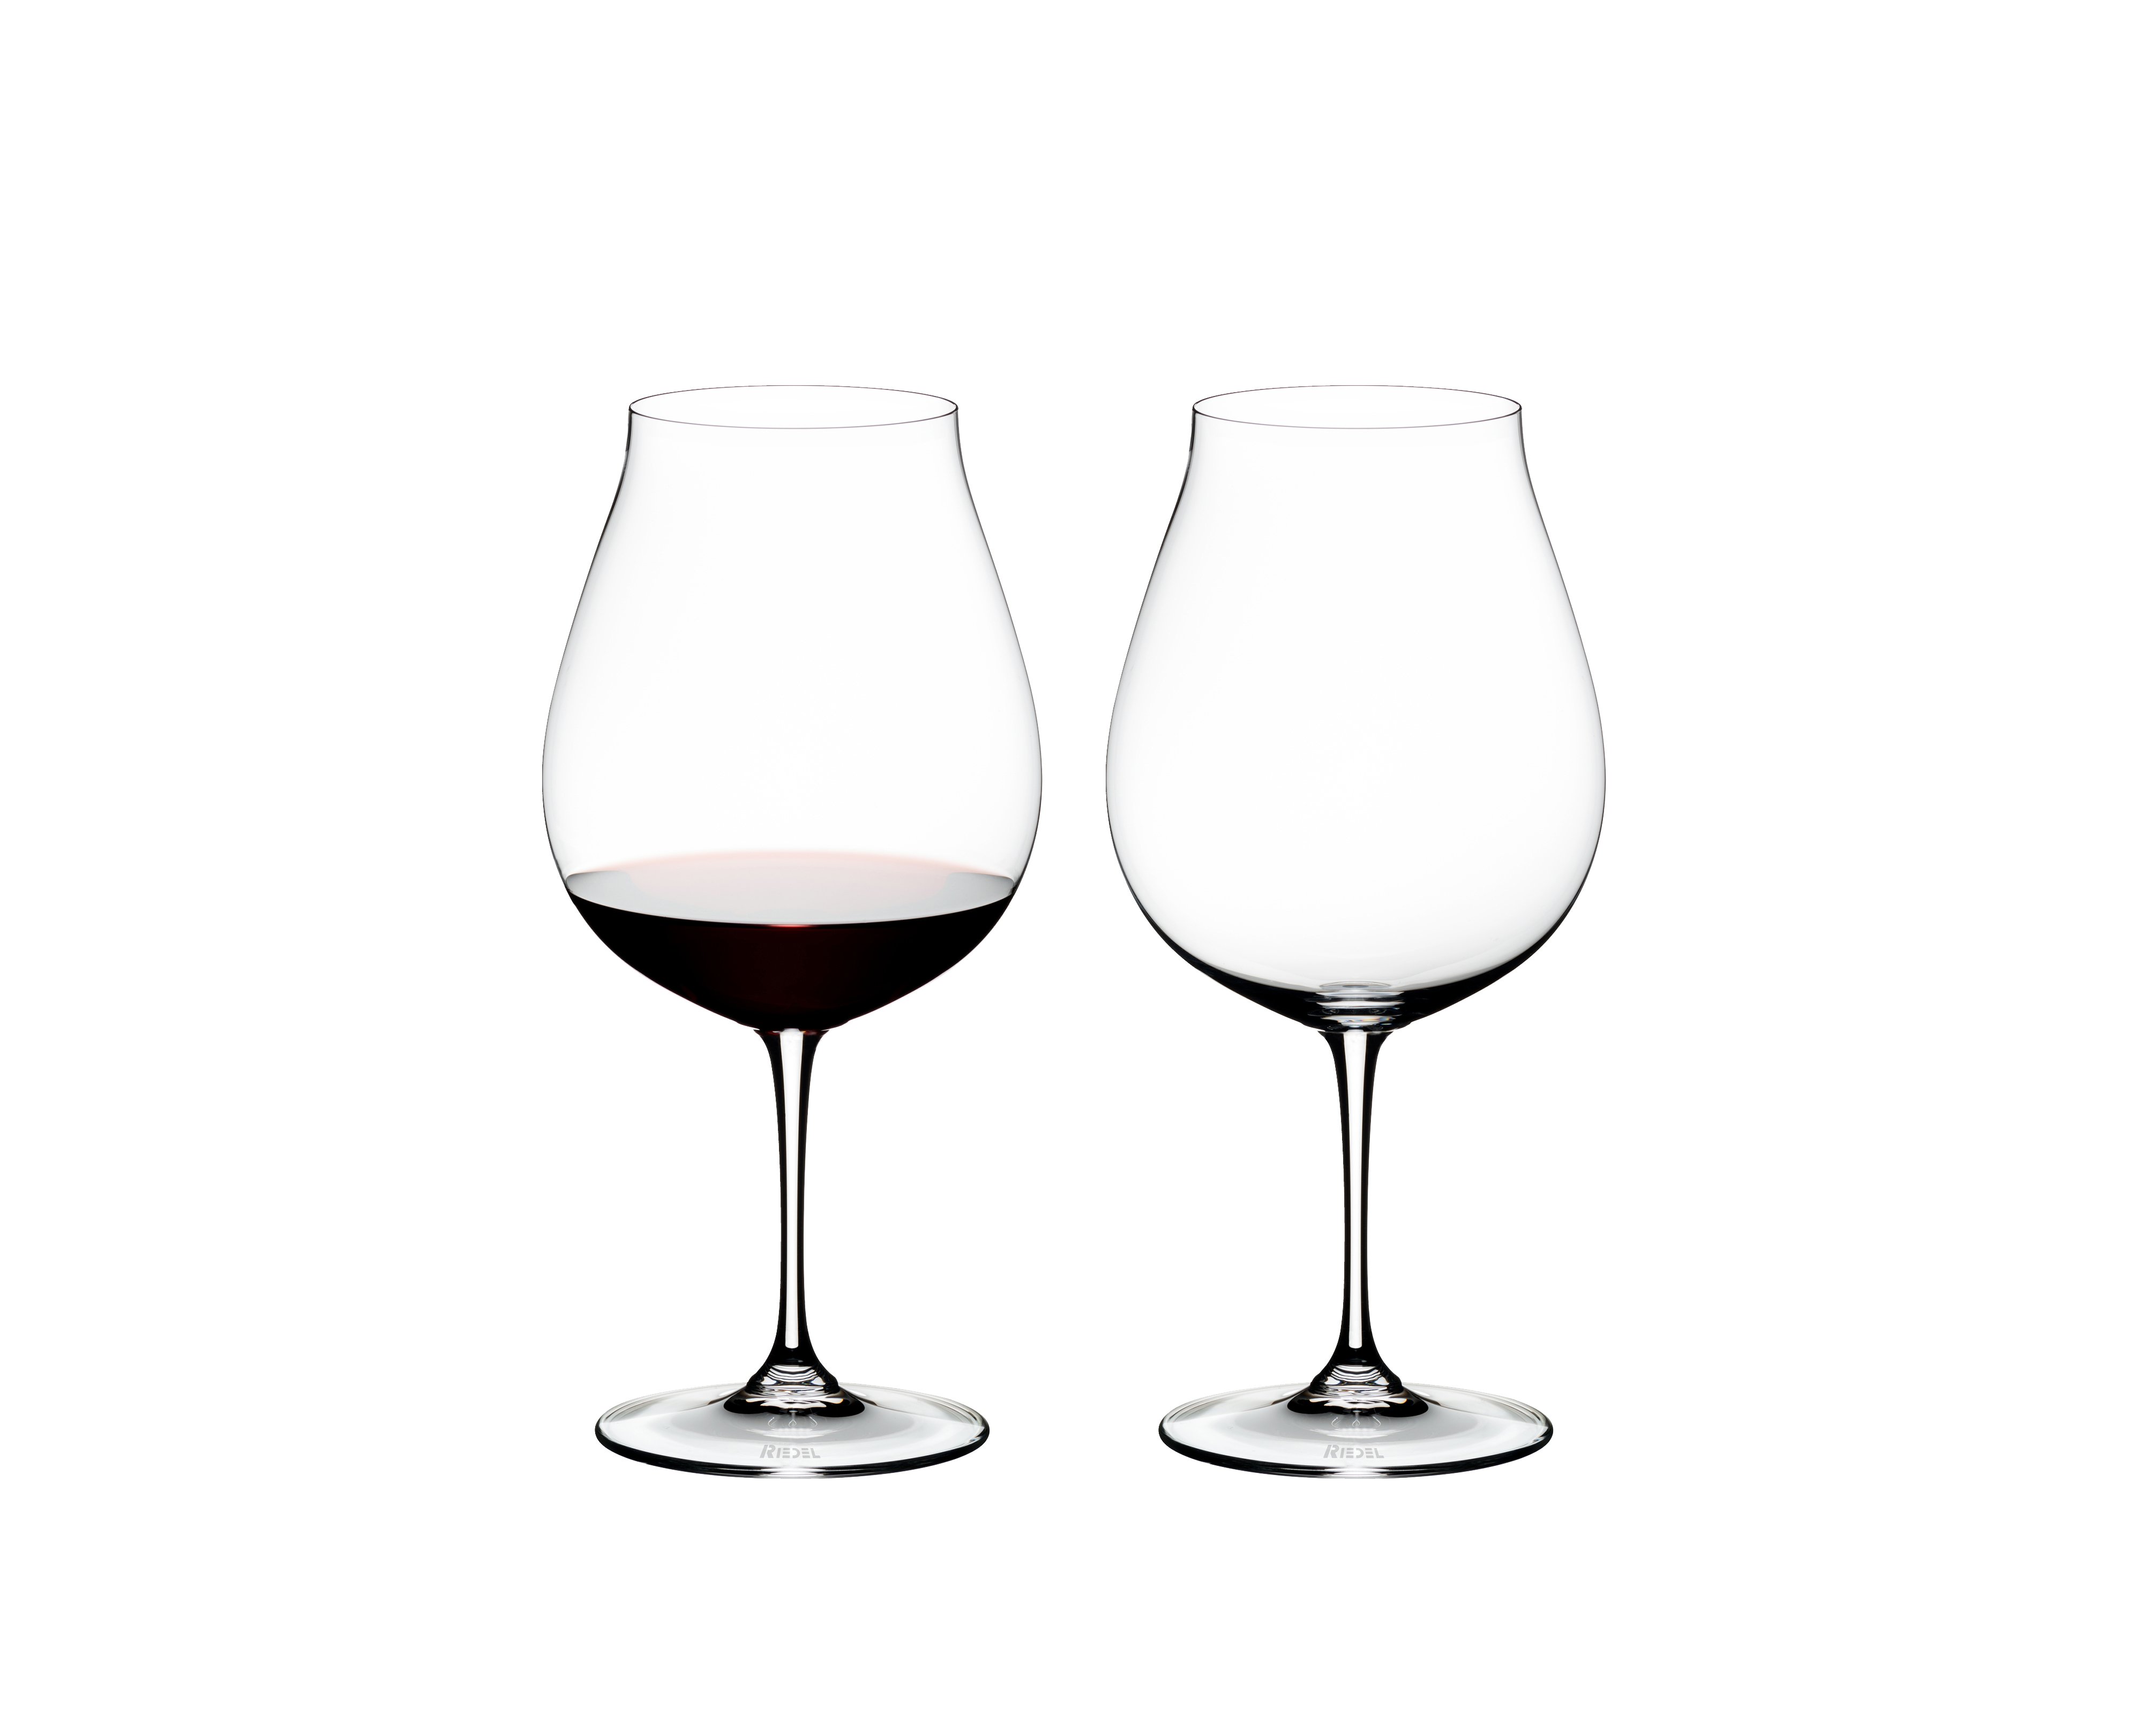 Riedel Performant Pinot Noir Glasses – The Cook's Nook